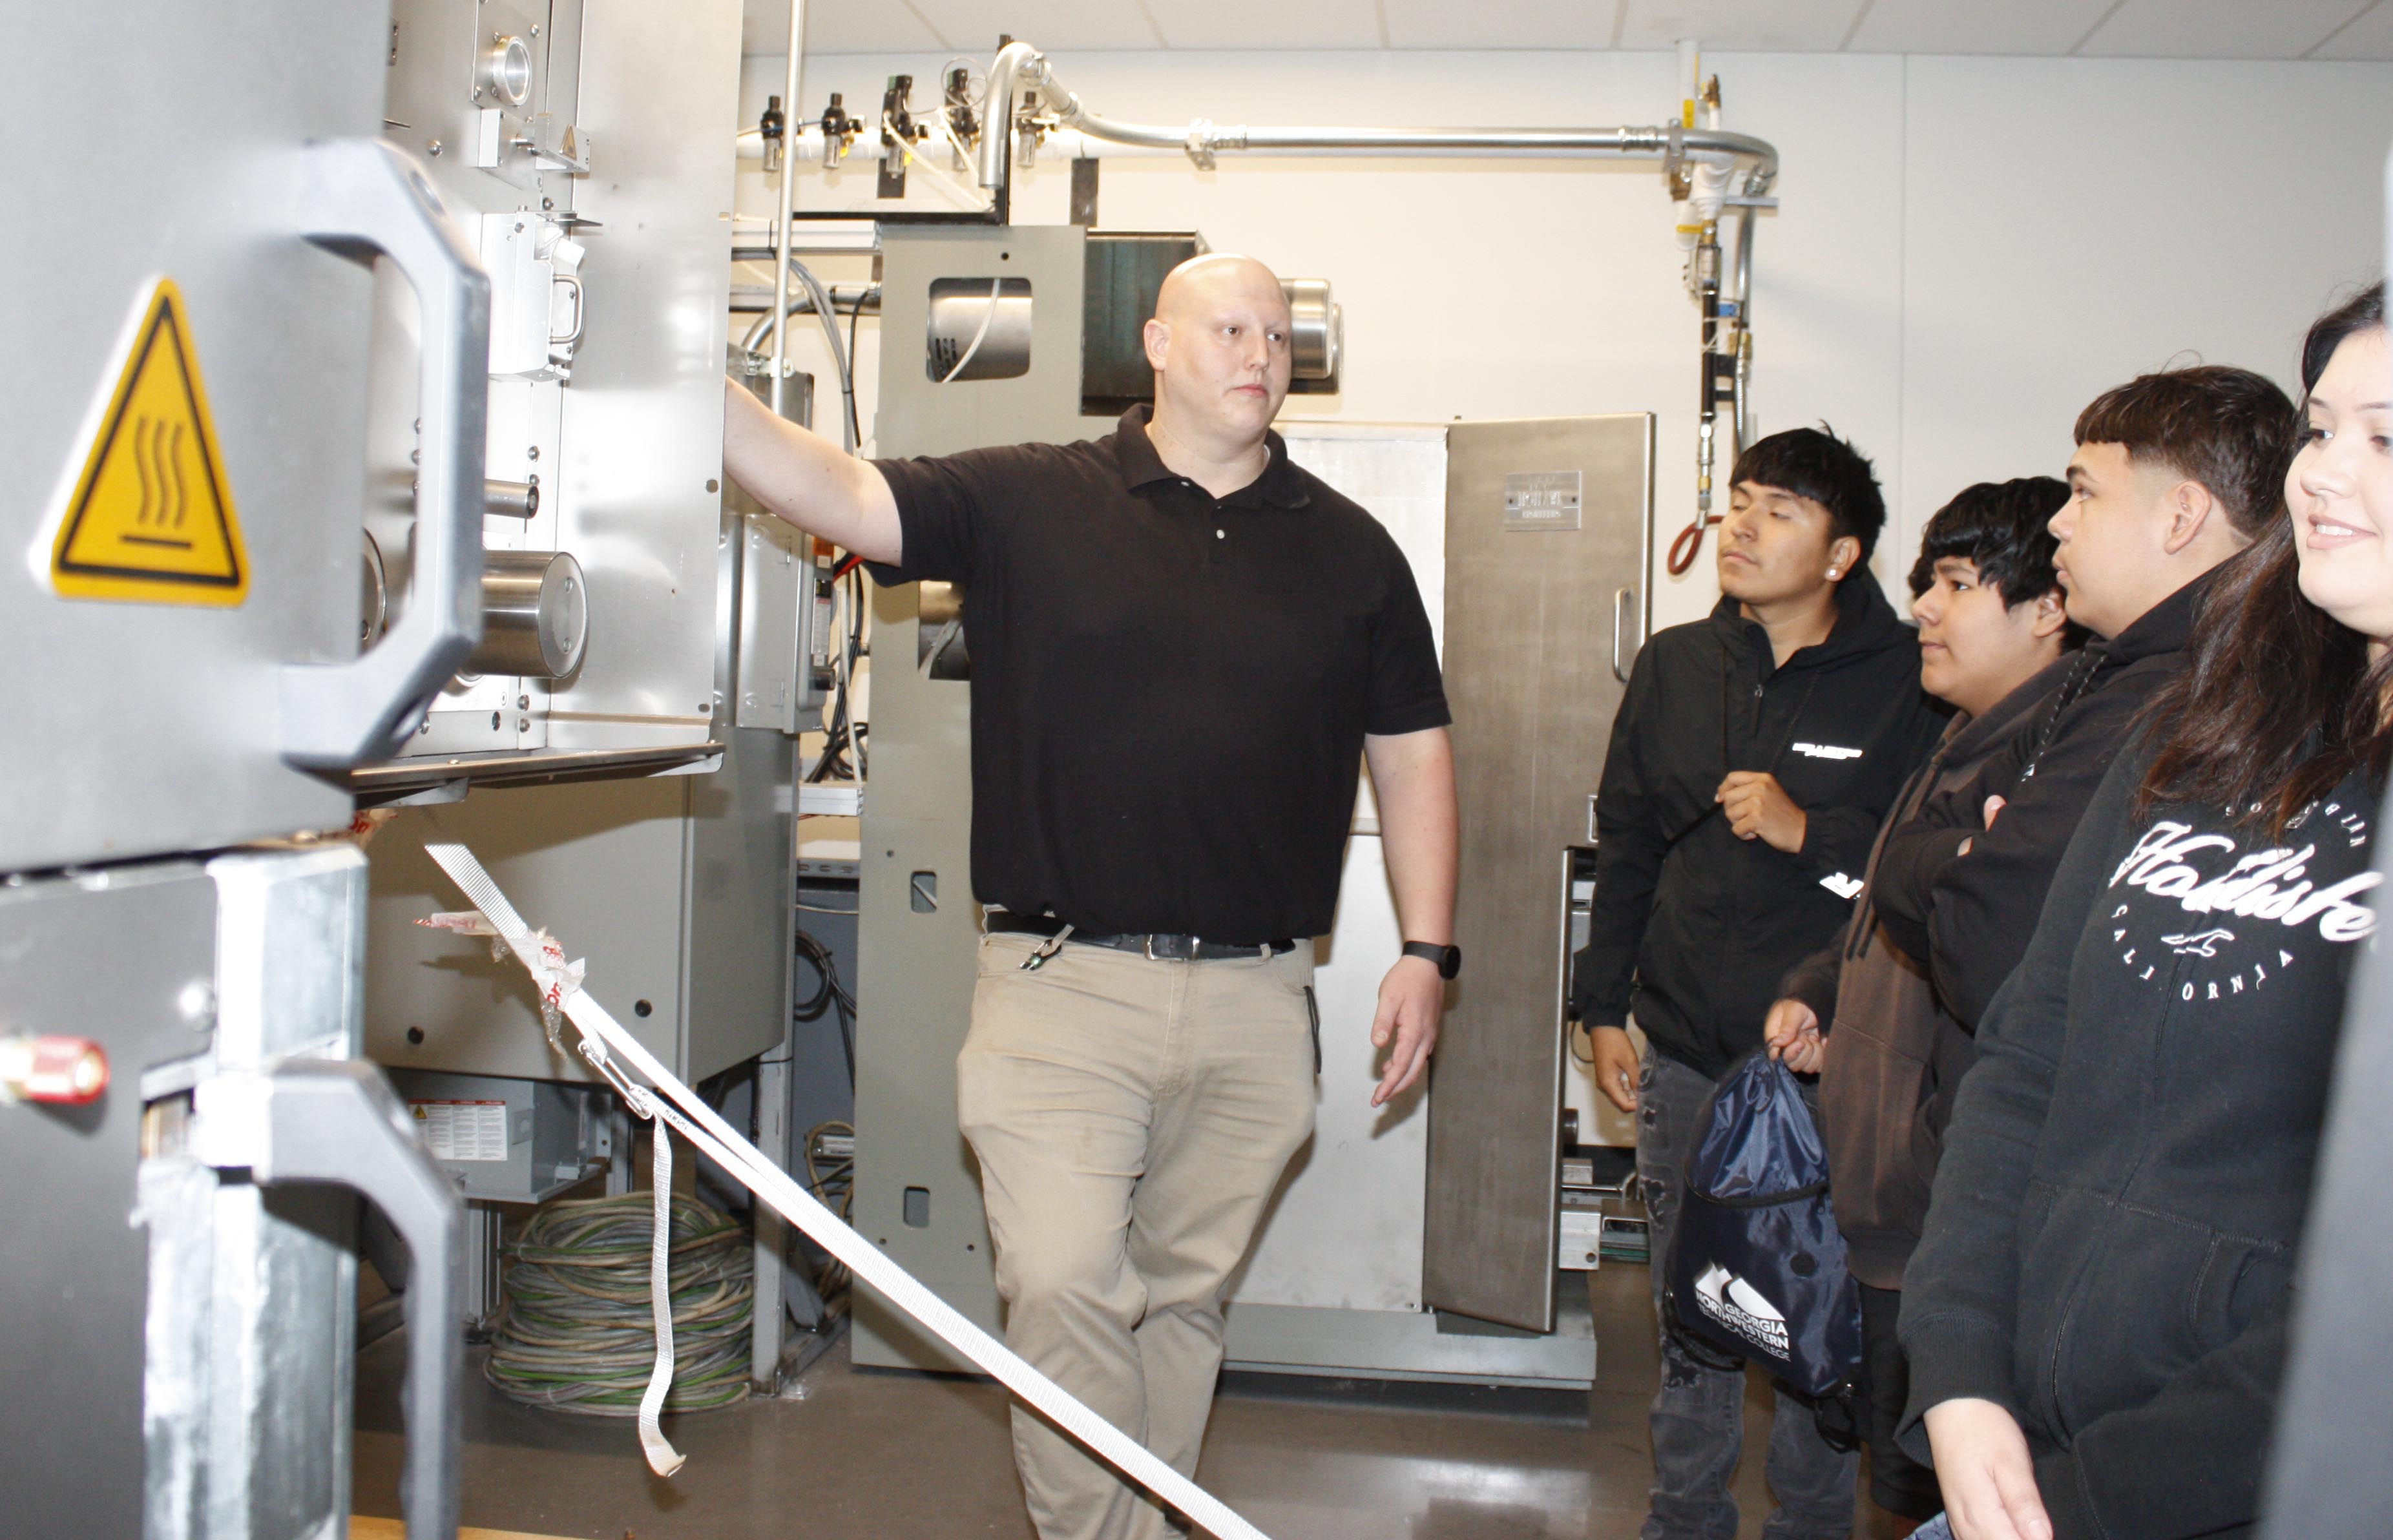 Dustin Tate, Carpet Training and Floor Production instructor and program director at GNTC (left), explains the carpet production process to students.